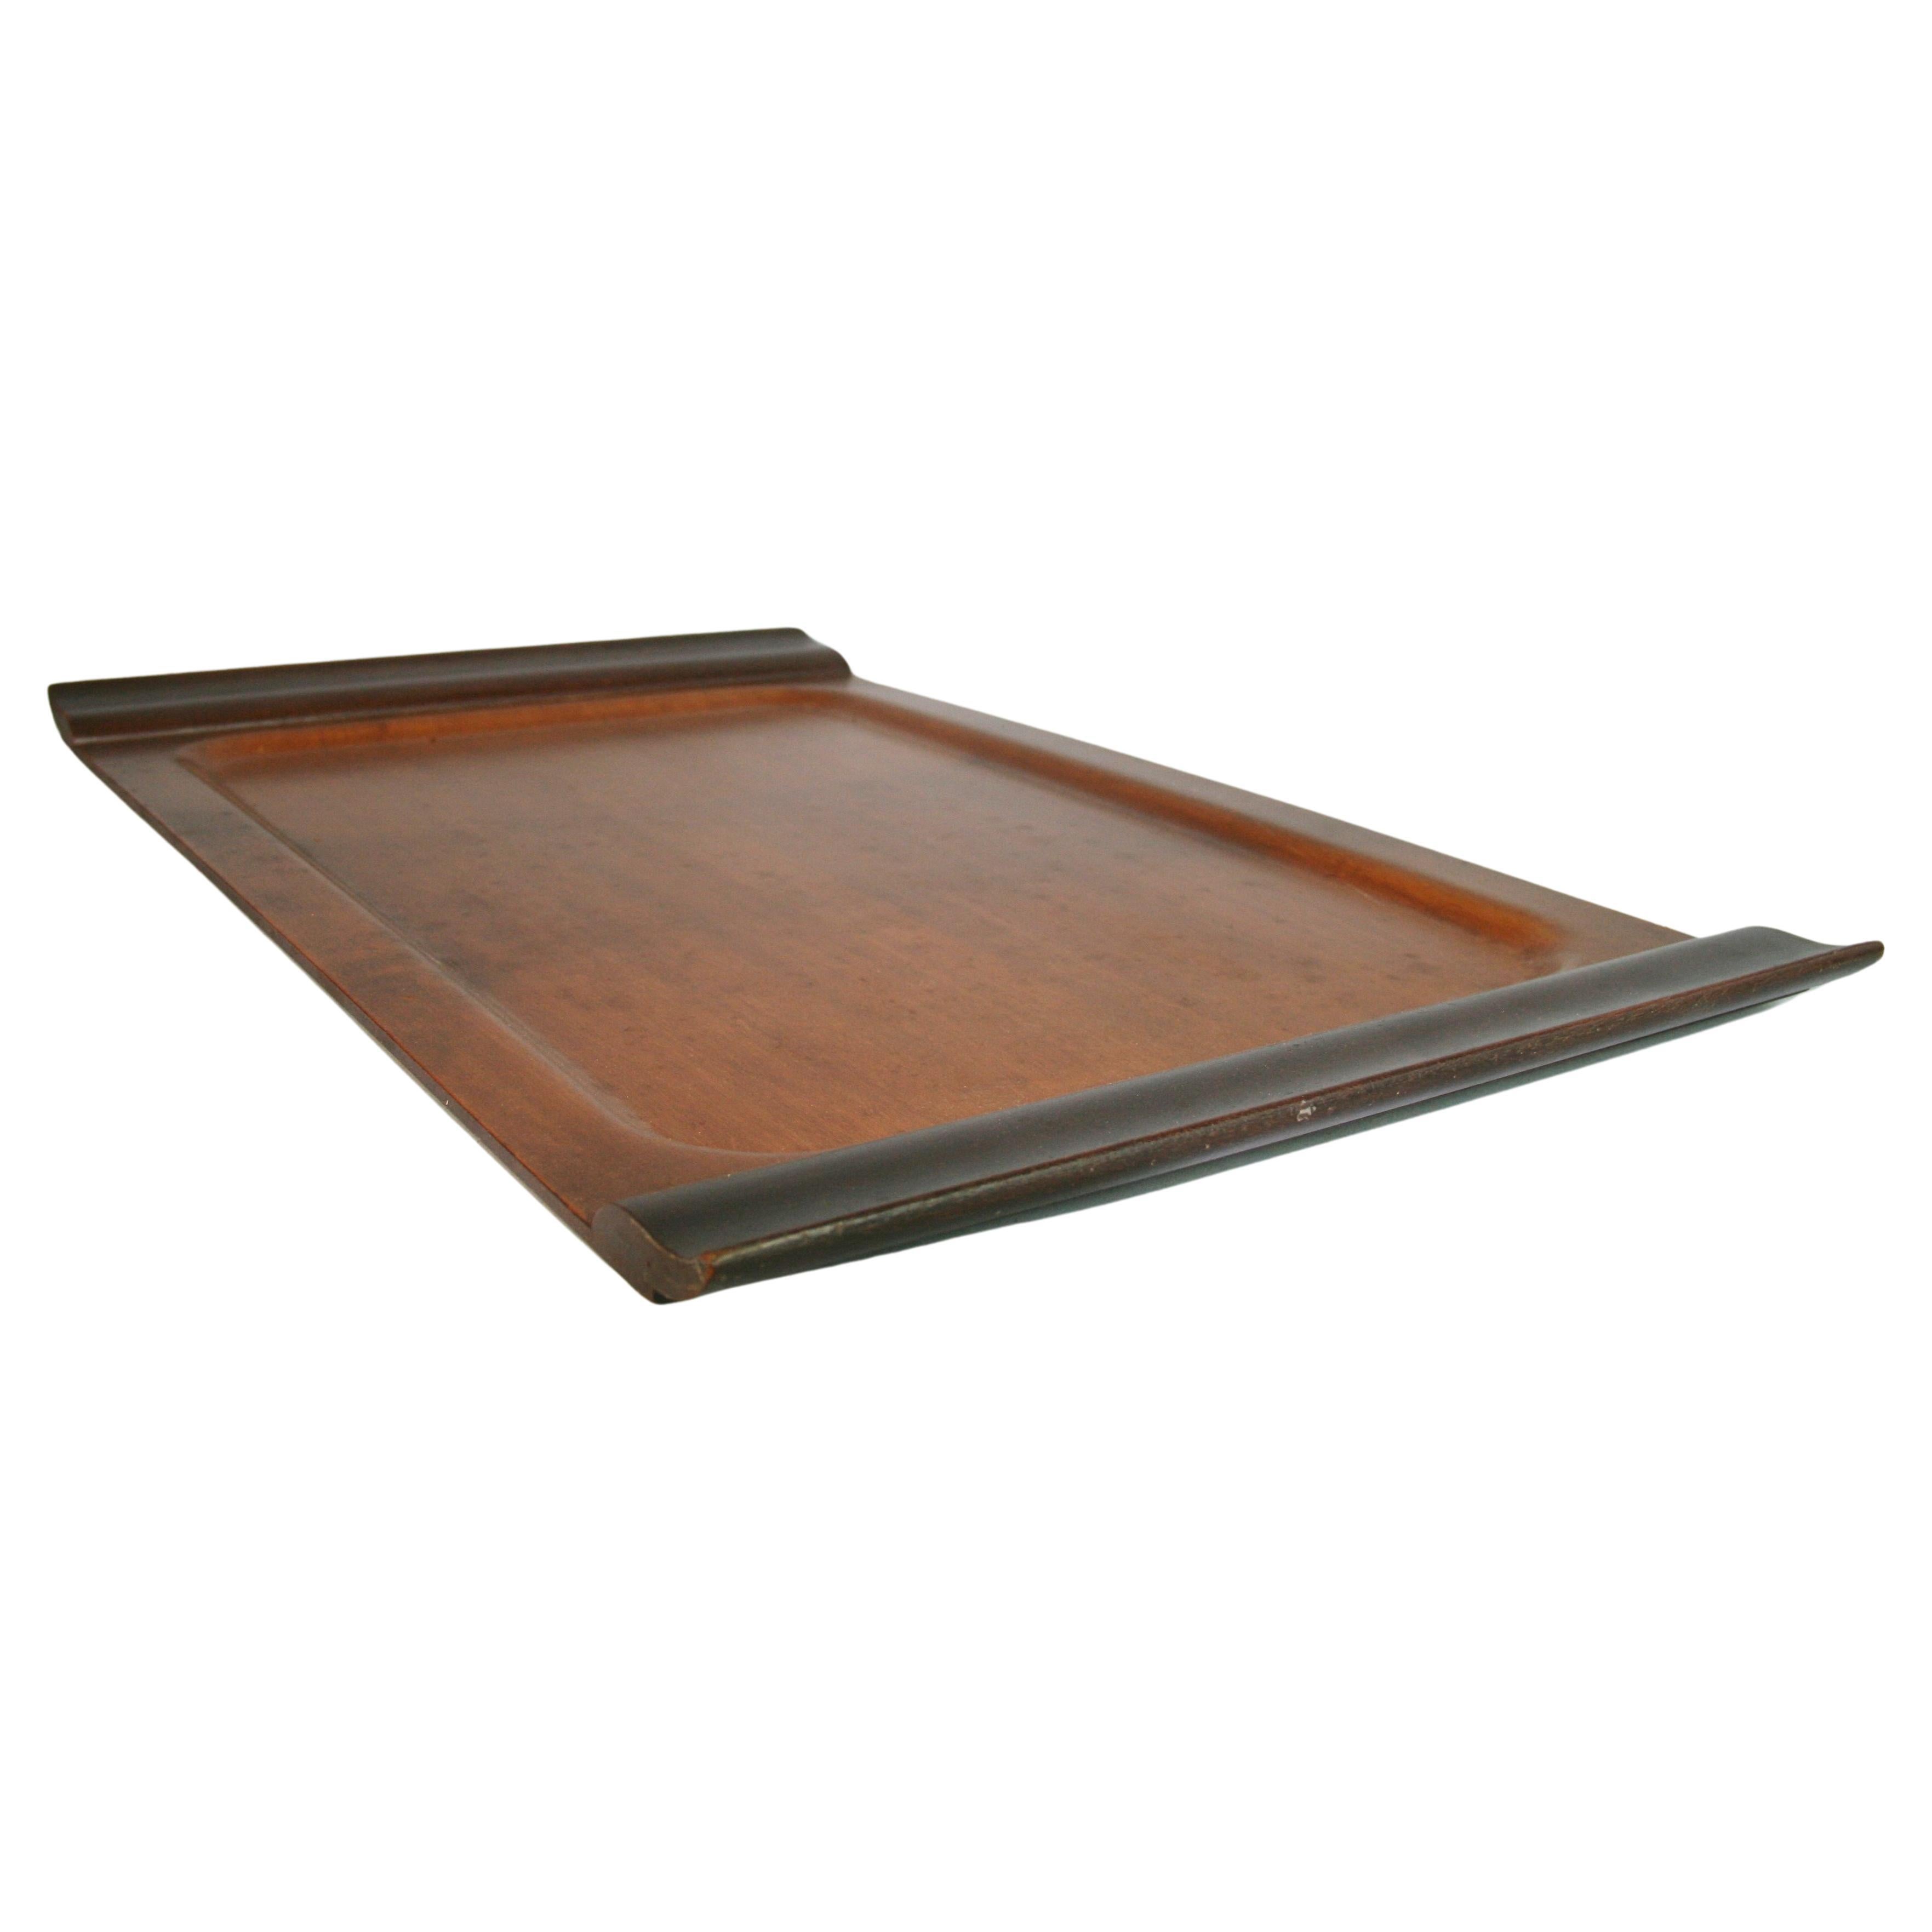 Plywood Platters and Serveware